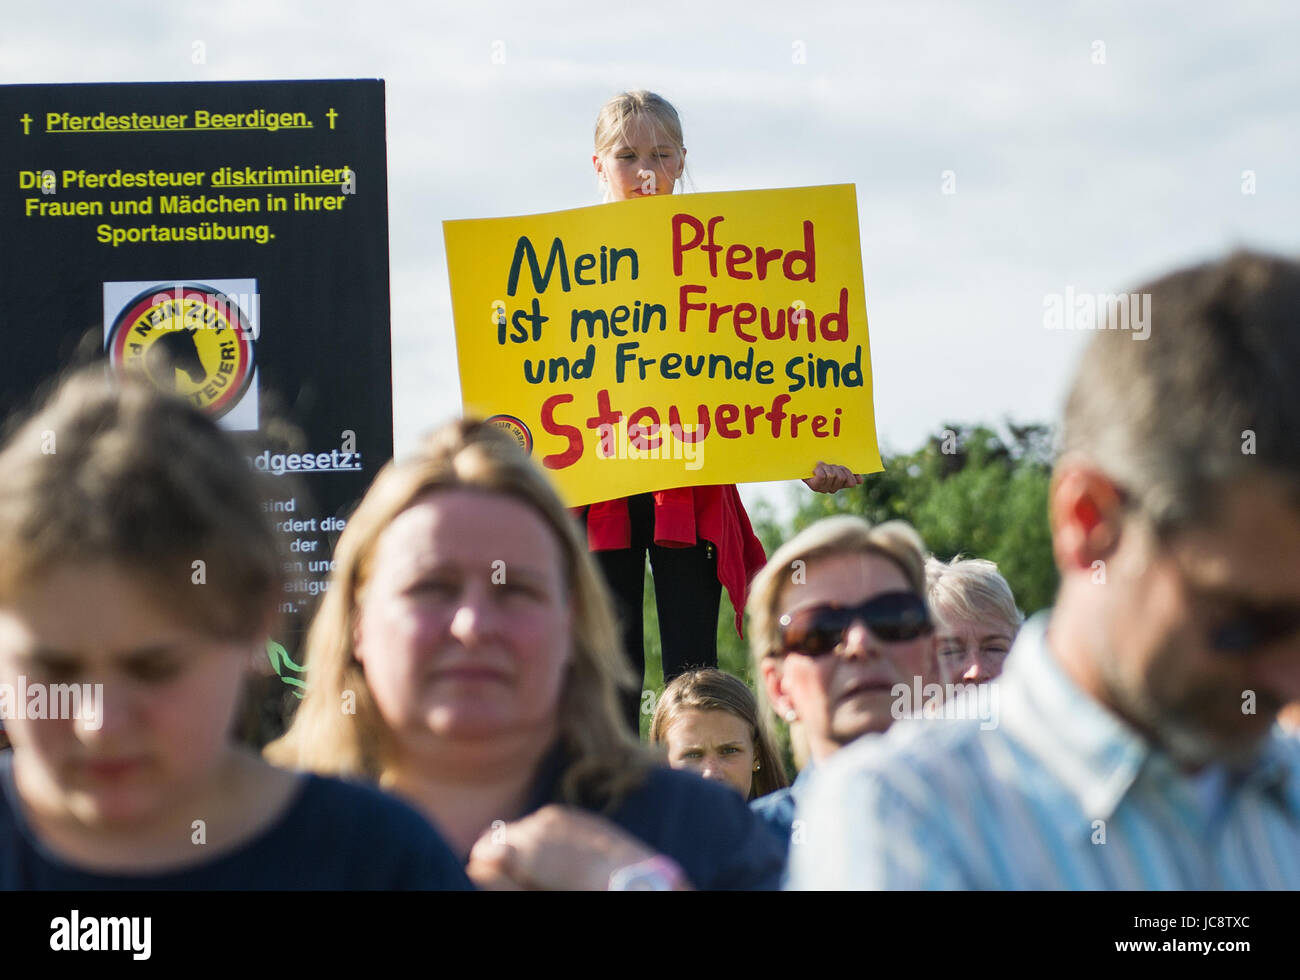 Tangstedt, Germany. 14th June, 2017. A child holds up a banner saying 'Mein Pferd ist mein Freund und Freunde sind steuerfrei' (lit. my horse is my friend and friends are tax free) during protests against the intended introduction of a horse tax before the local council's session in Tangstedt, Germany, 14 June 2017. Last November the introduction of the tax could be stopped last-minute. Photo: Christina Sabrowsky/dpa/Alamy Live News Stock Photo